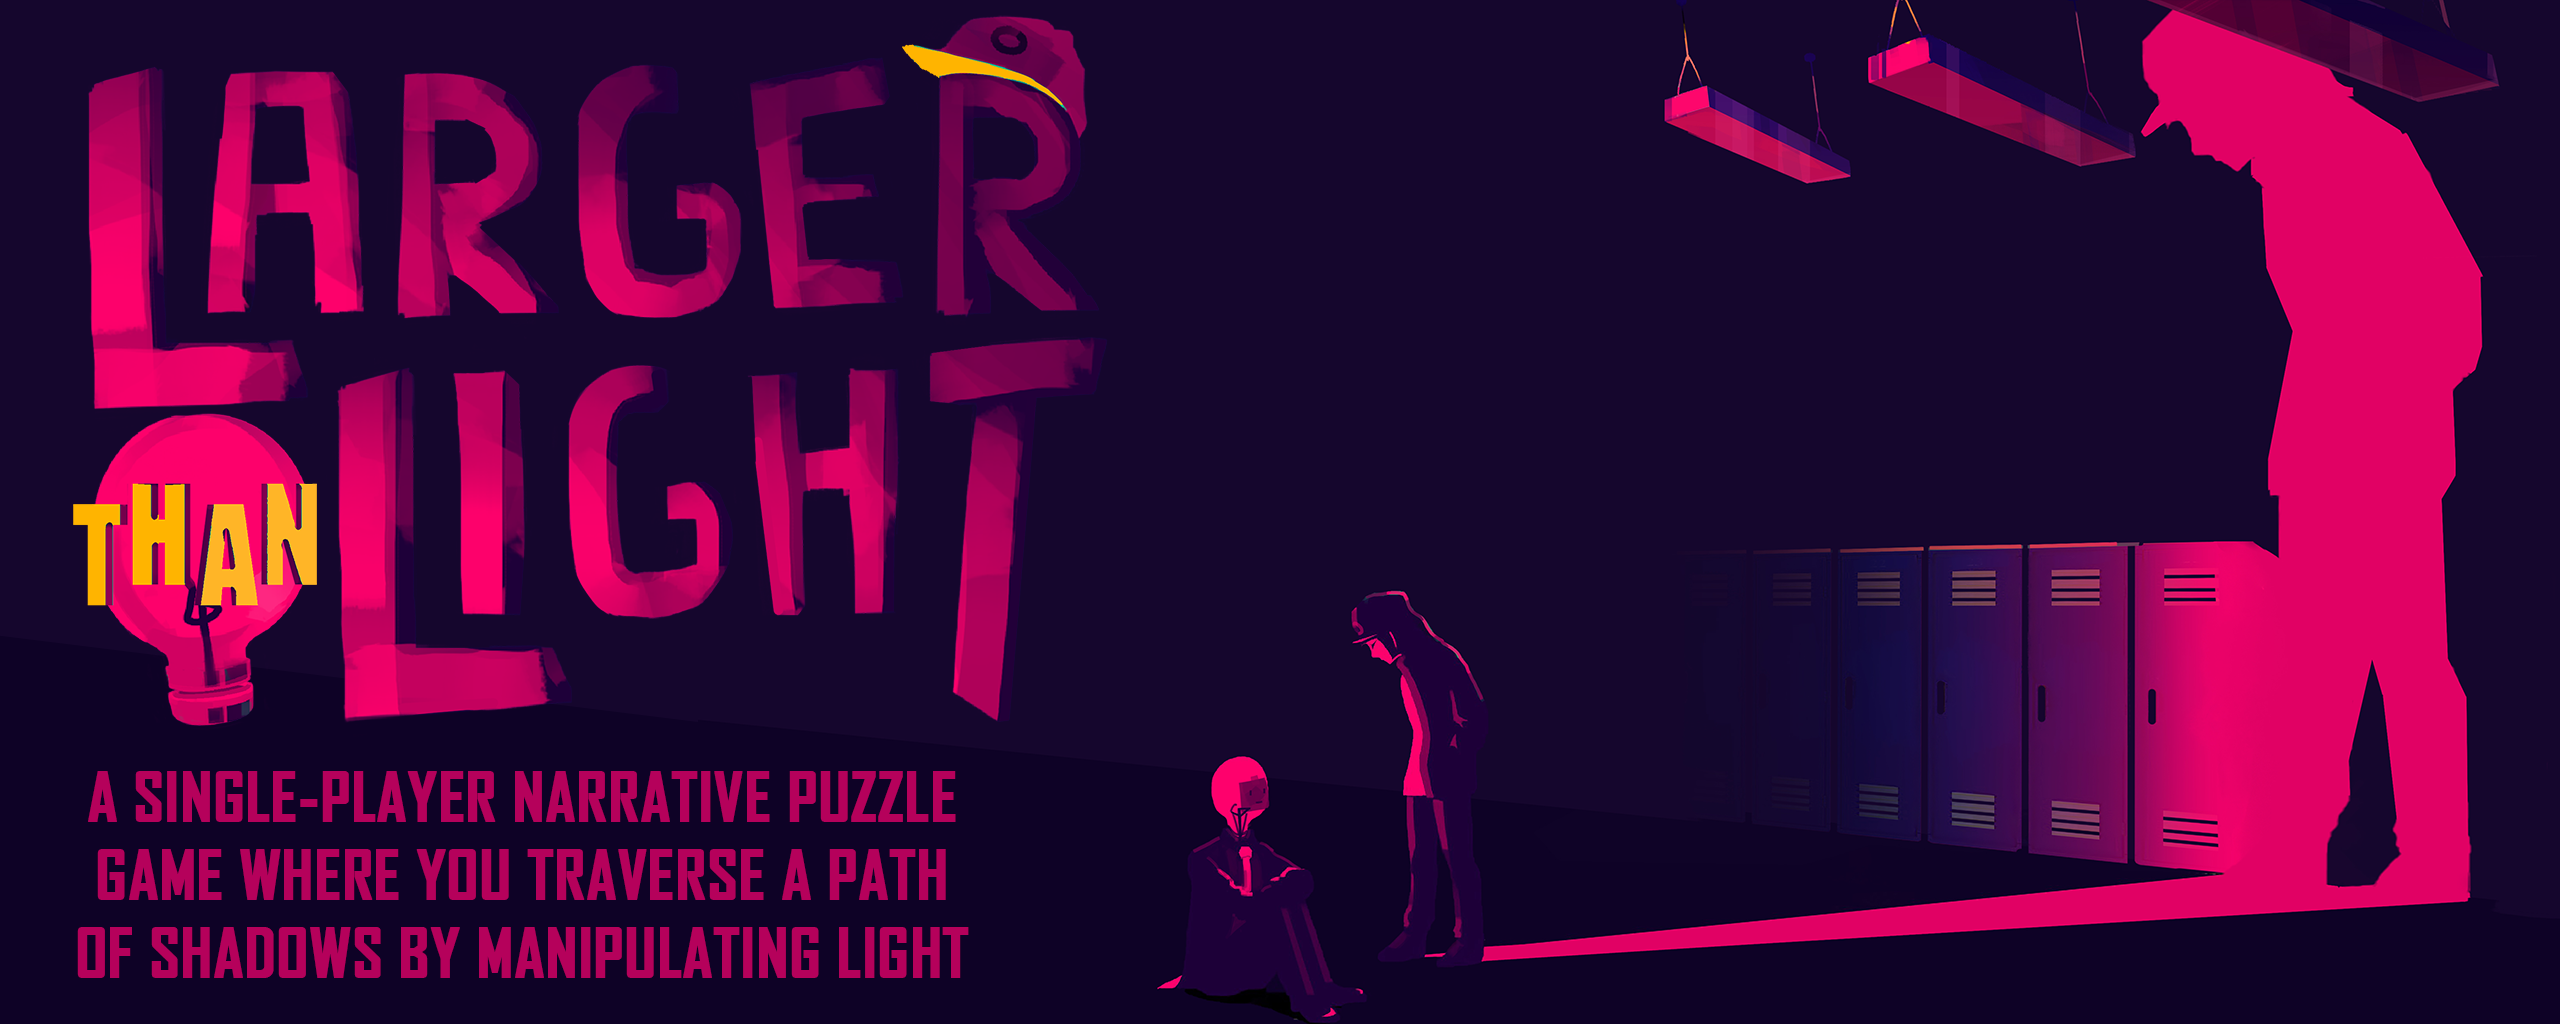 [itch.io]-get-free-pc-game:-larger-than-light